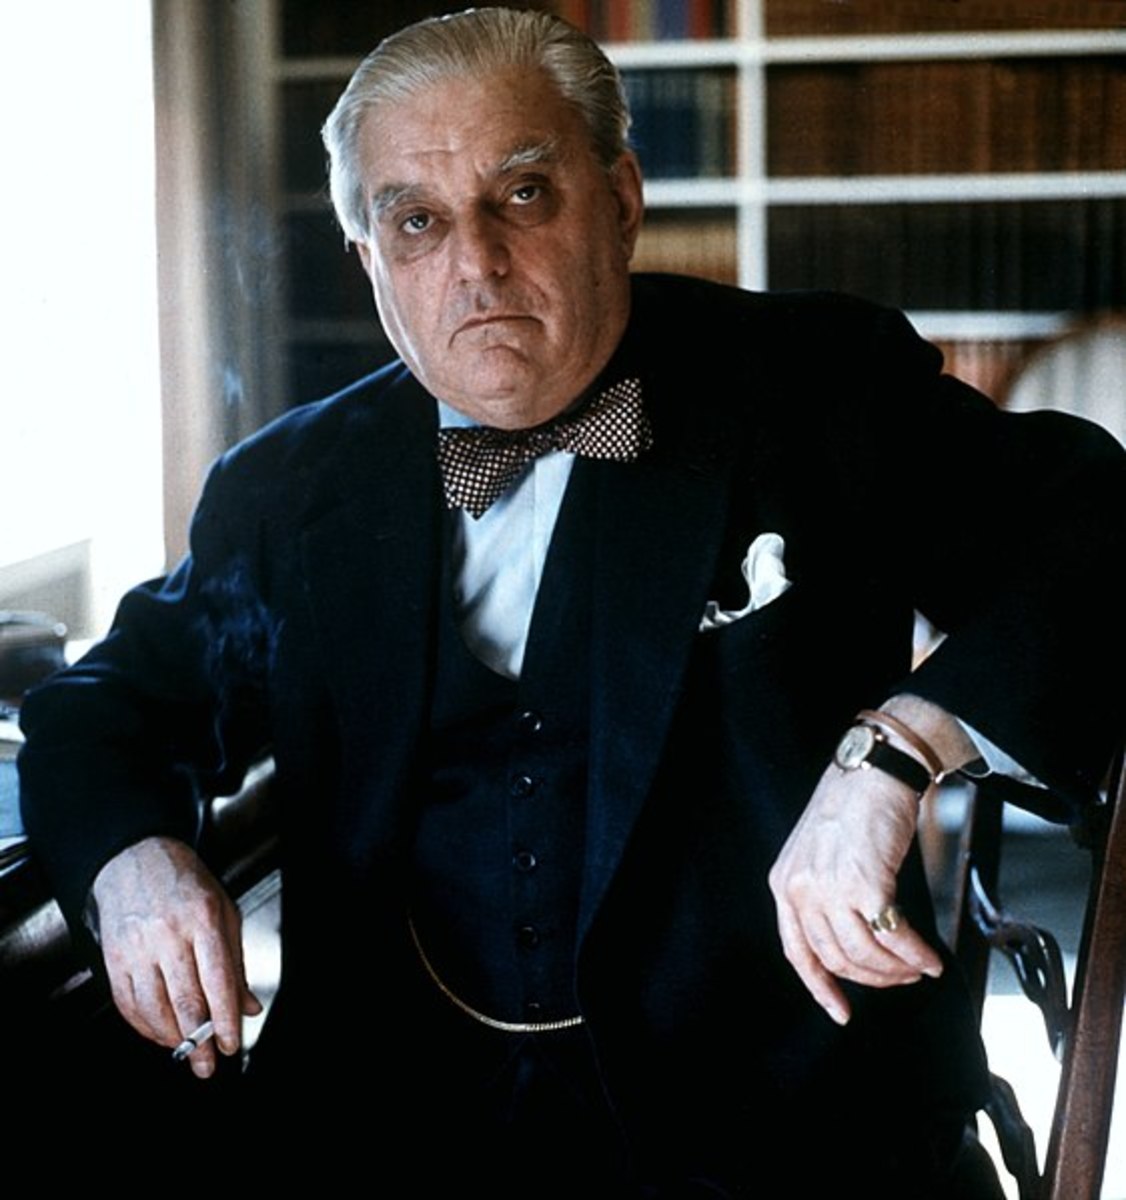 Writer Ludovic Kennedy once called Lord Boothby (above) to his face “a shit of the highest order.” Boothby chuckled and replied “Well a bit. Not entirely.”